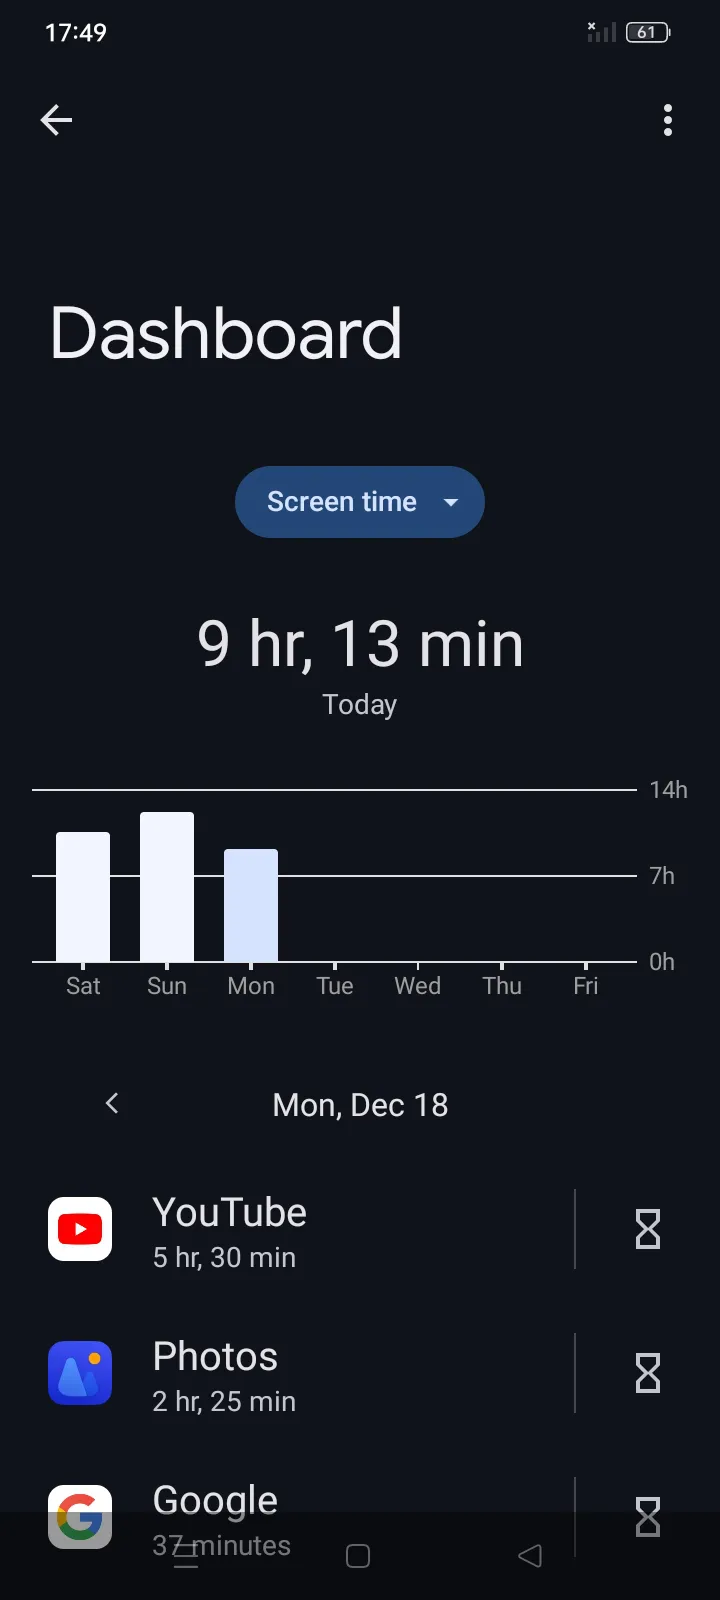 The graph How to Check Screen Time on Android